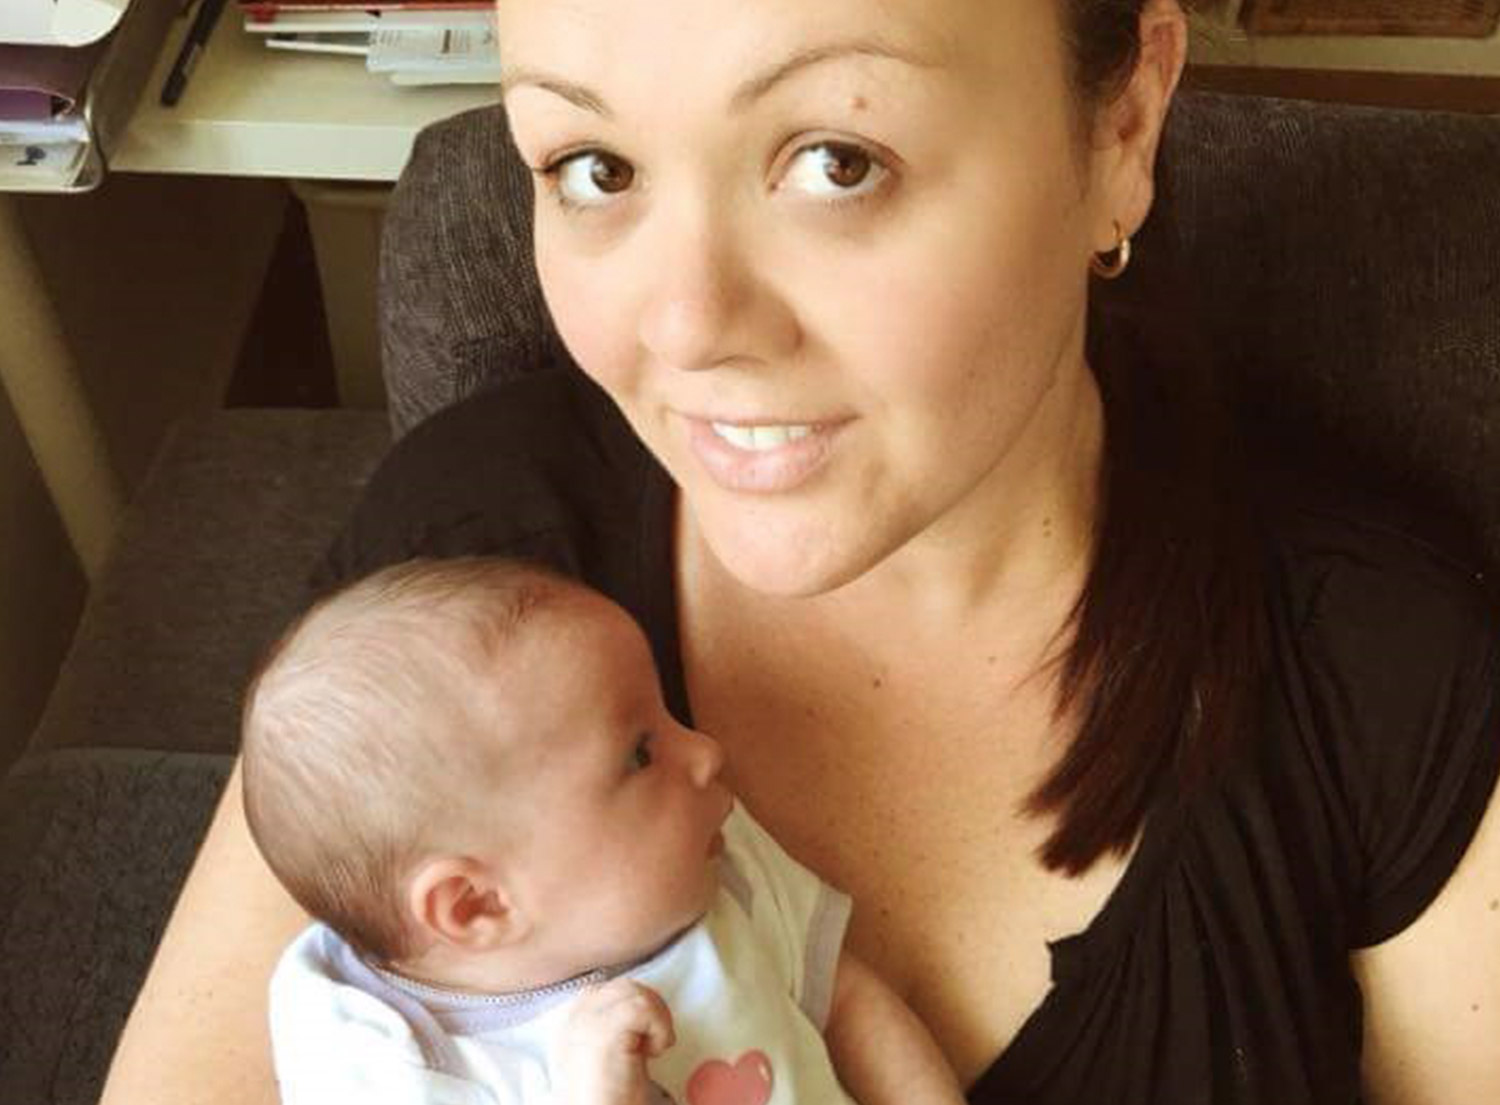 KinCare Home Care Worker Abby holding a baby